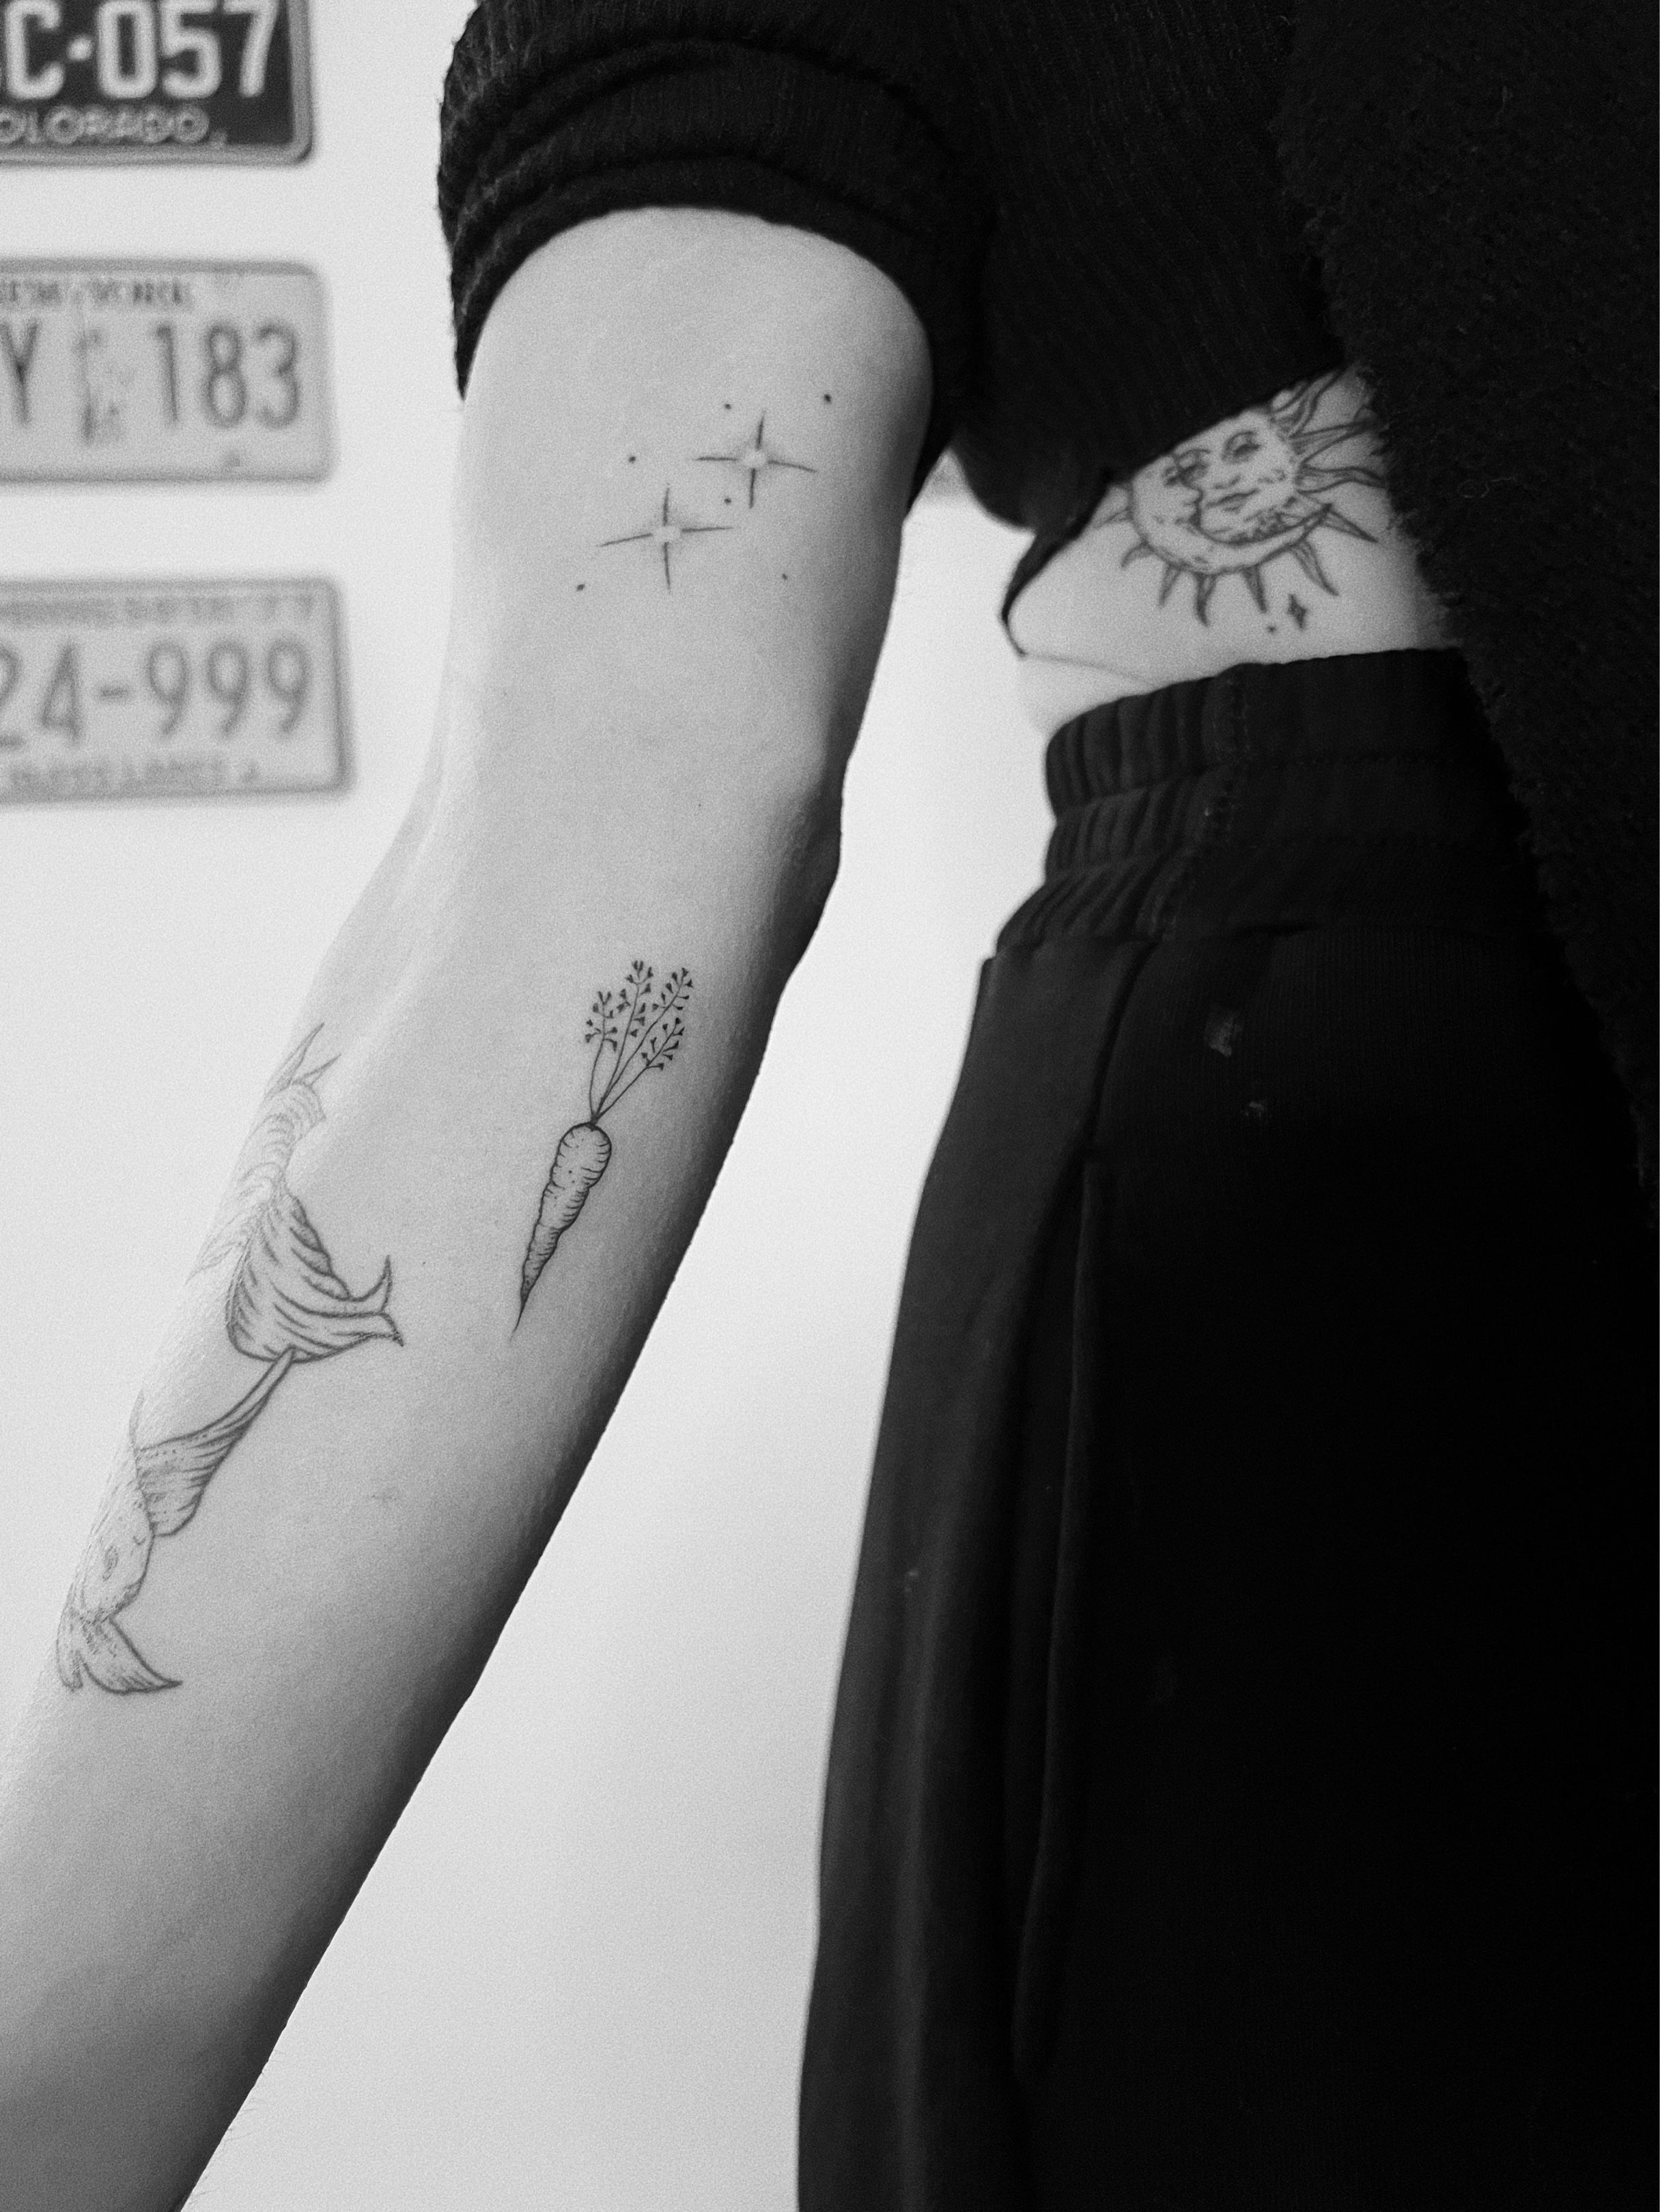 a tattoo of Two Rabbits sharing a Carrot